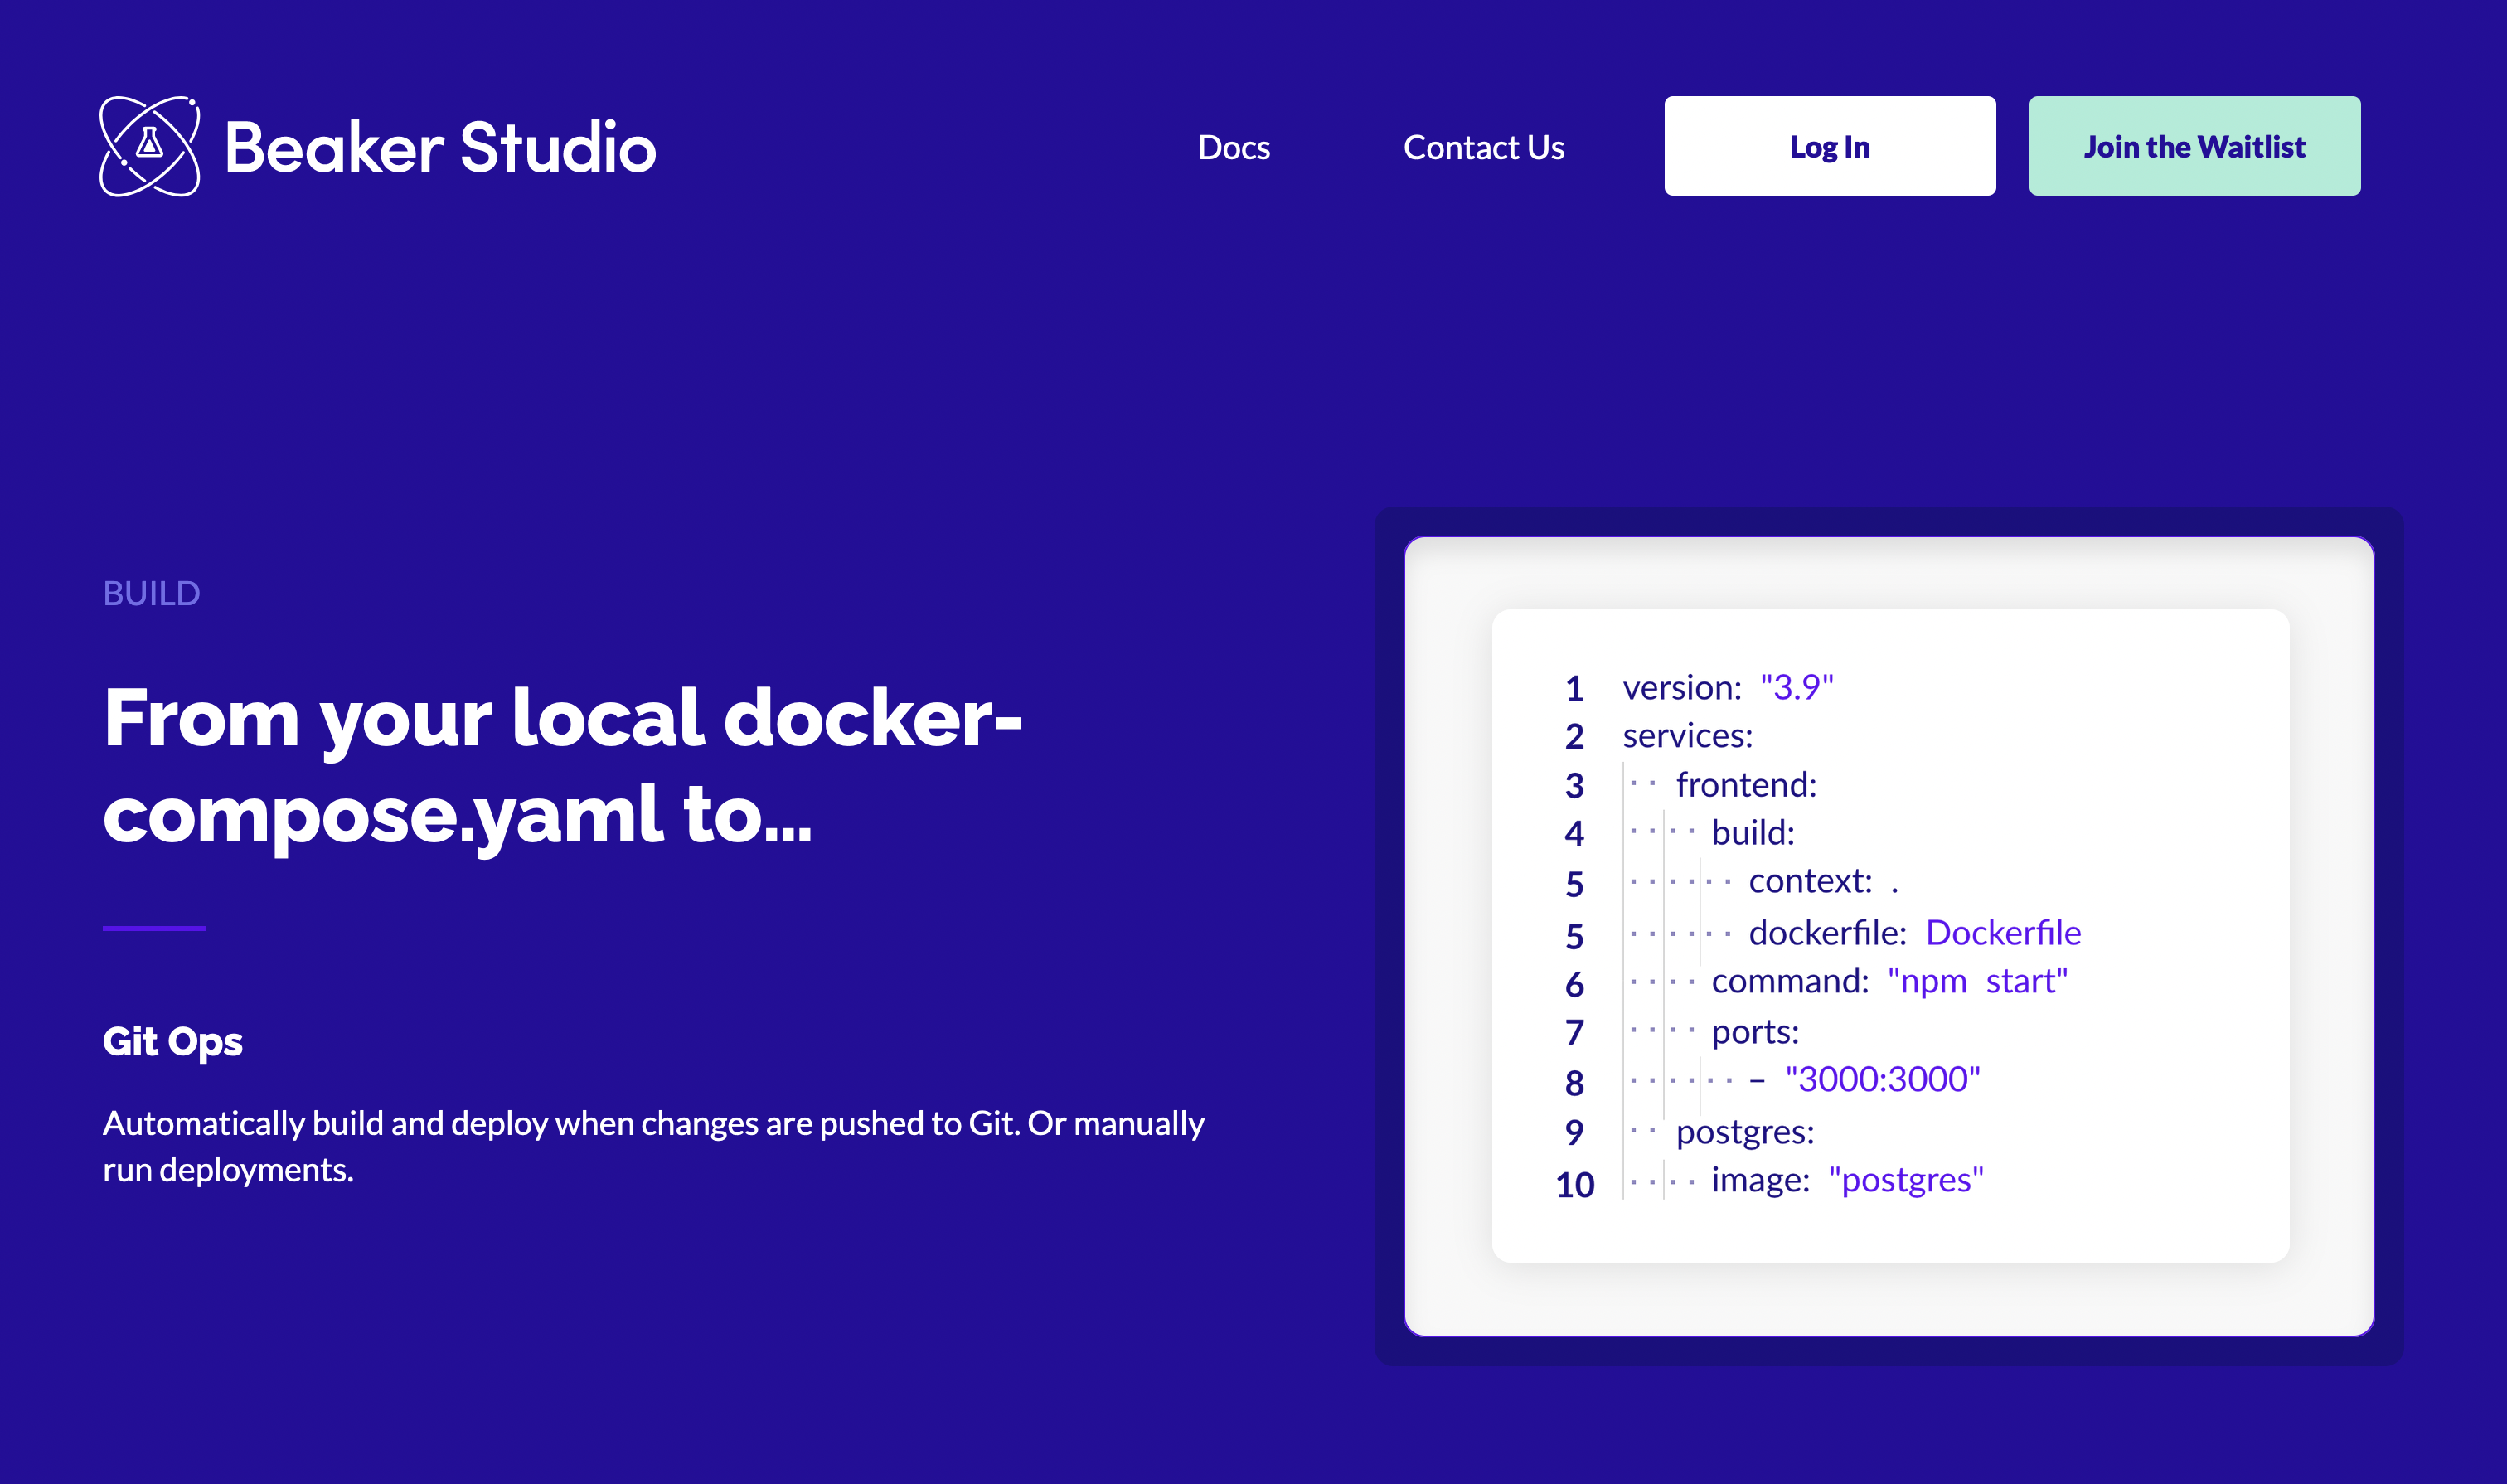 From your local docker-compose.yaml to...